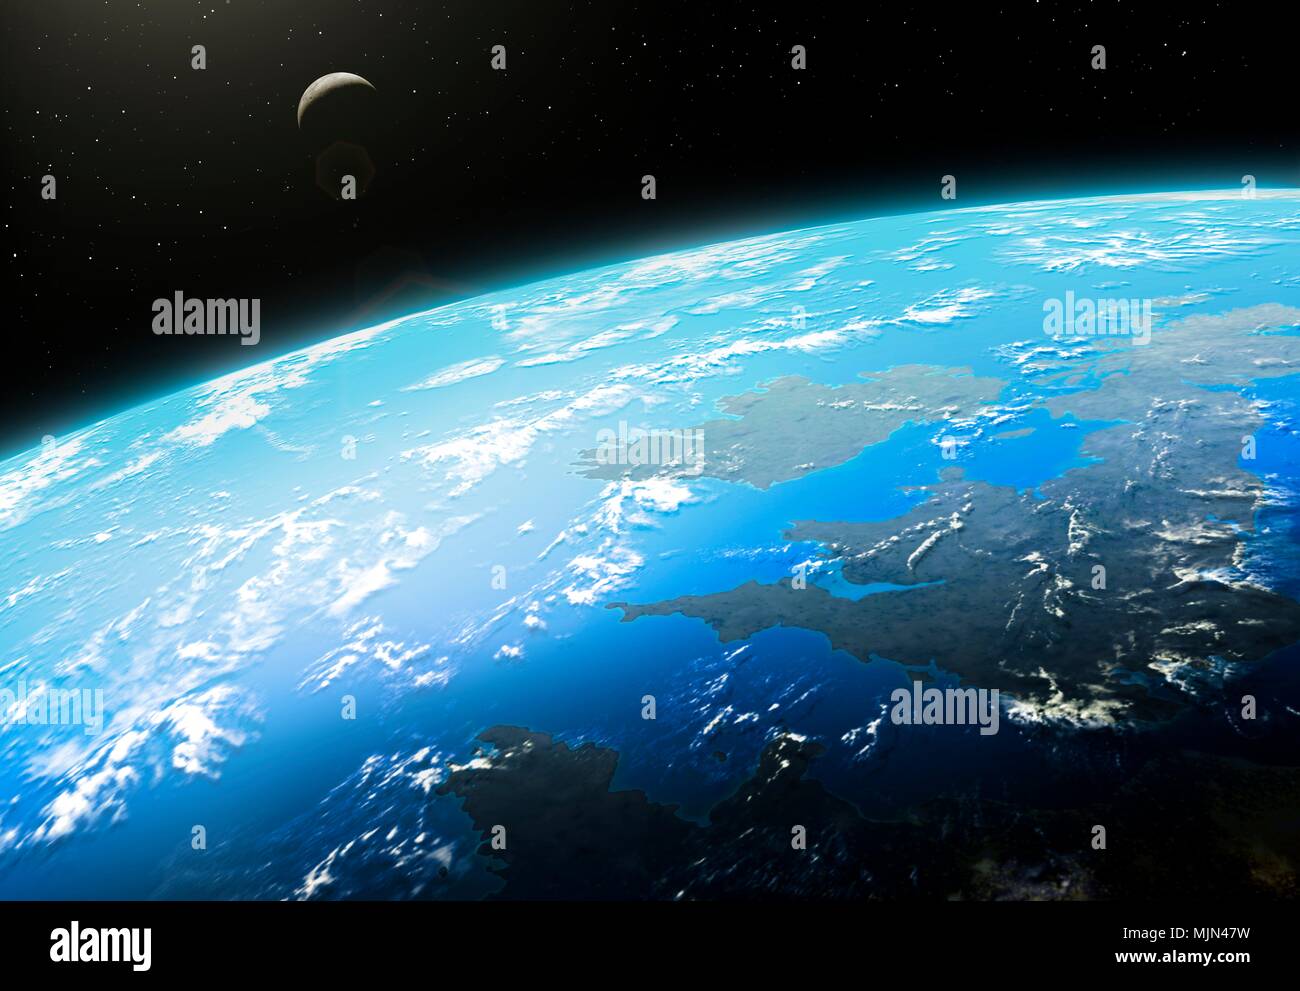 Illustration of the Earth from Space. This is a view over Europe, centred on the United Kingdom and France. The Moon is also visible. Stock Photo